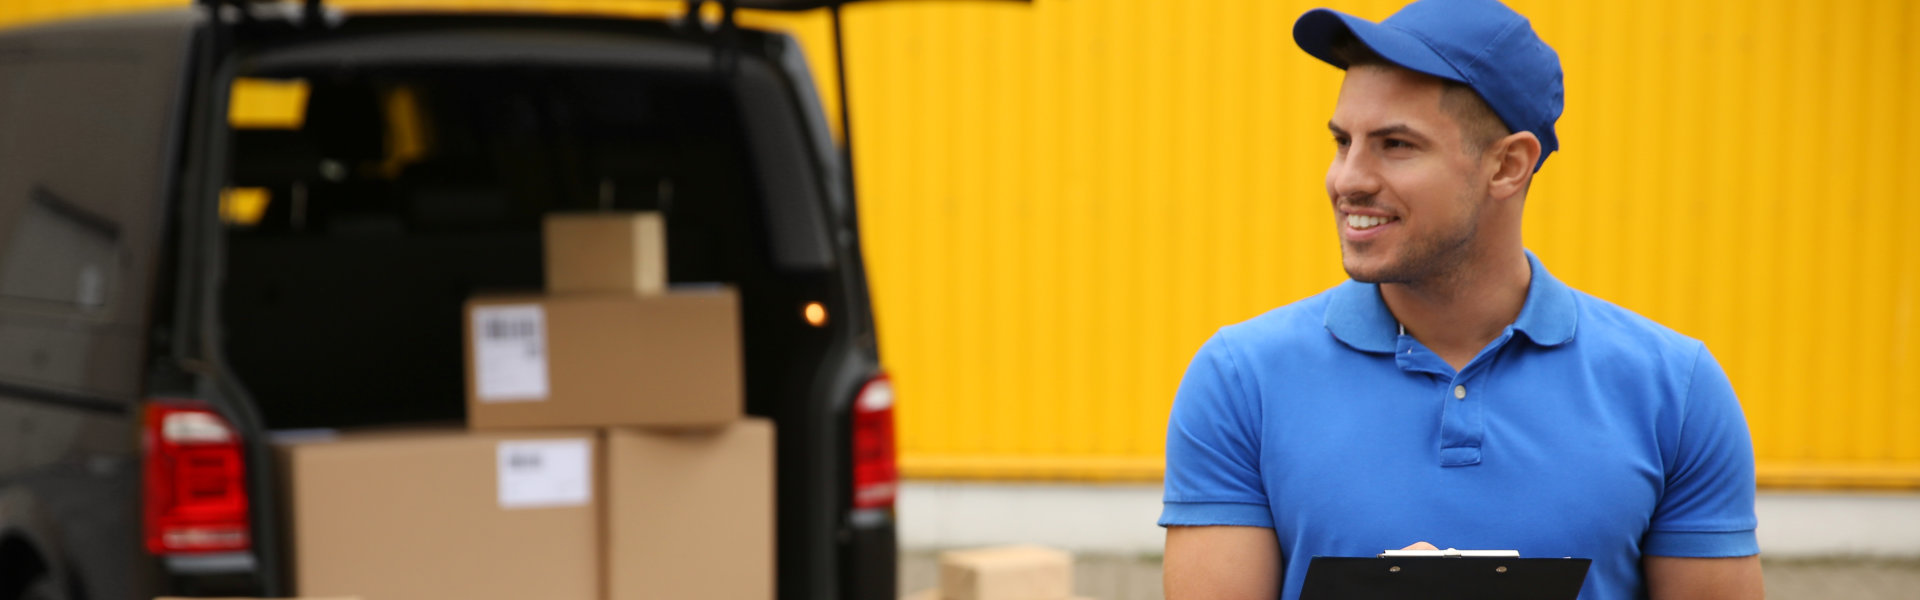 delivery man in a blue shirt